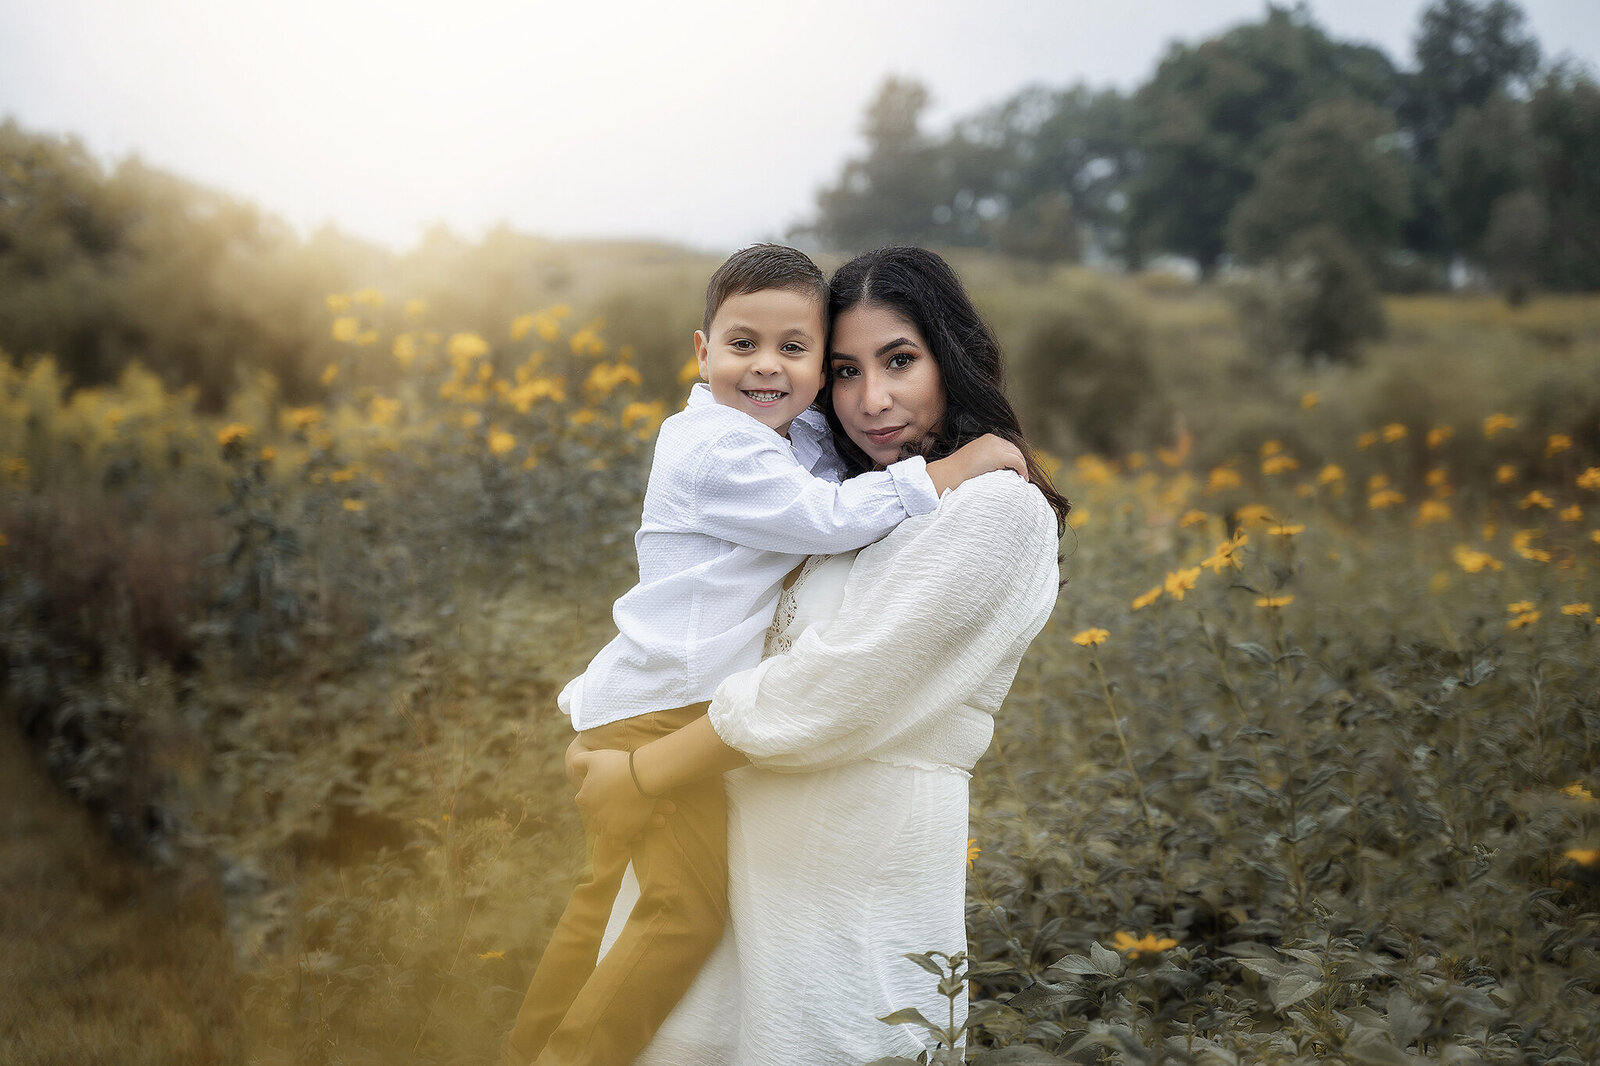 Mom holding her son in front of grass with yellow flowers